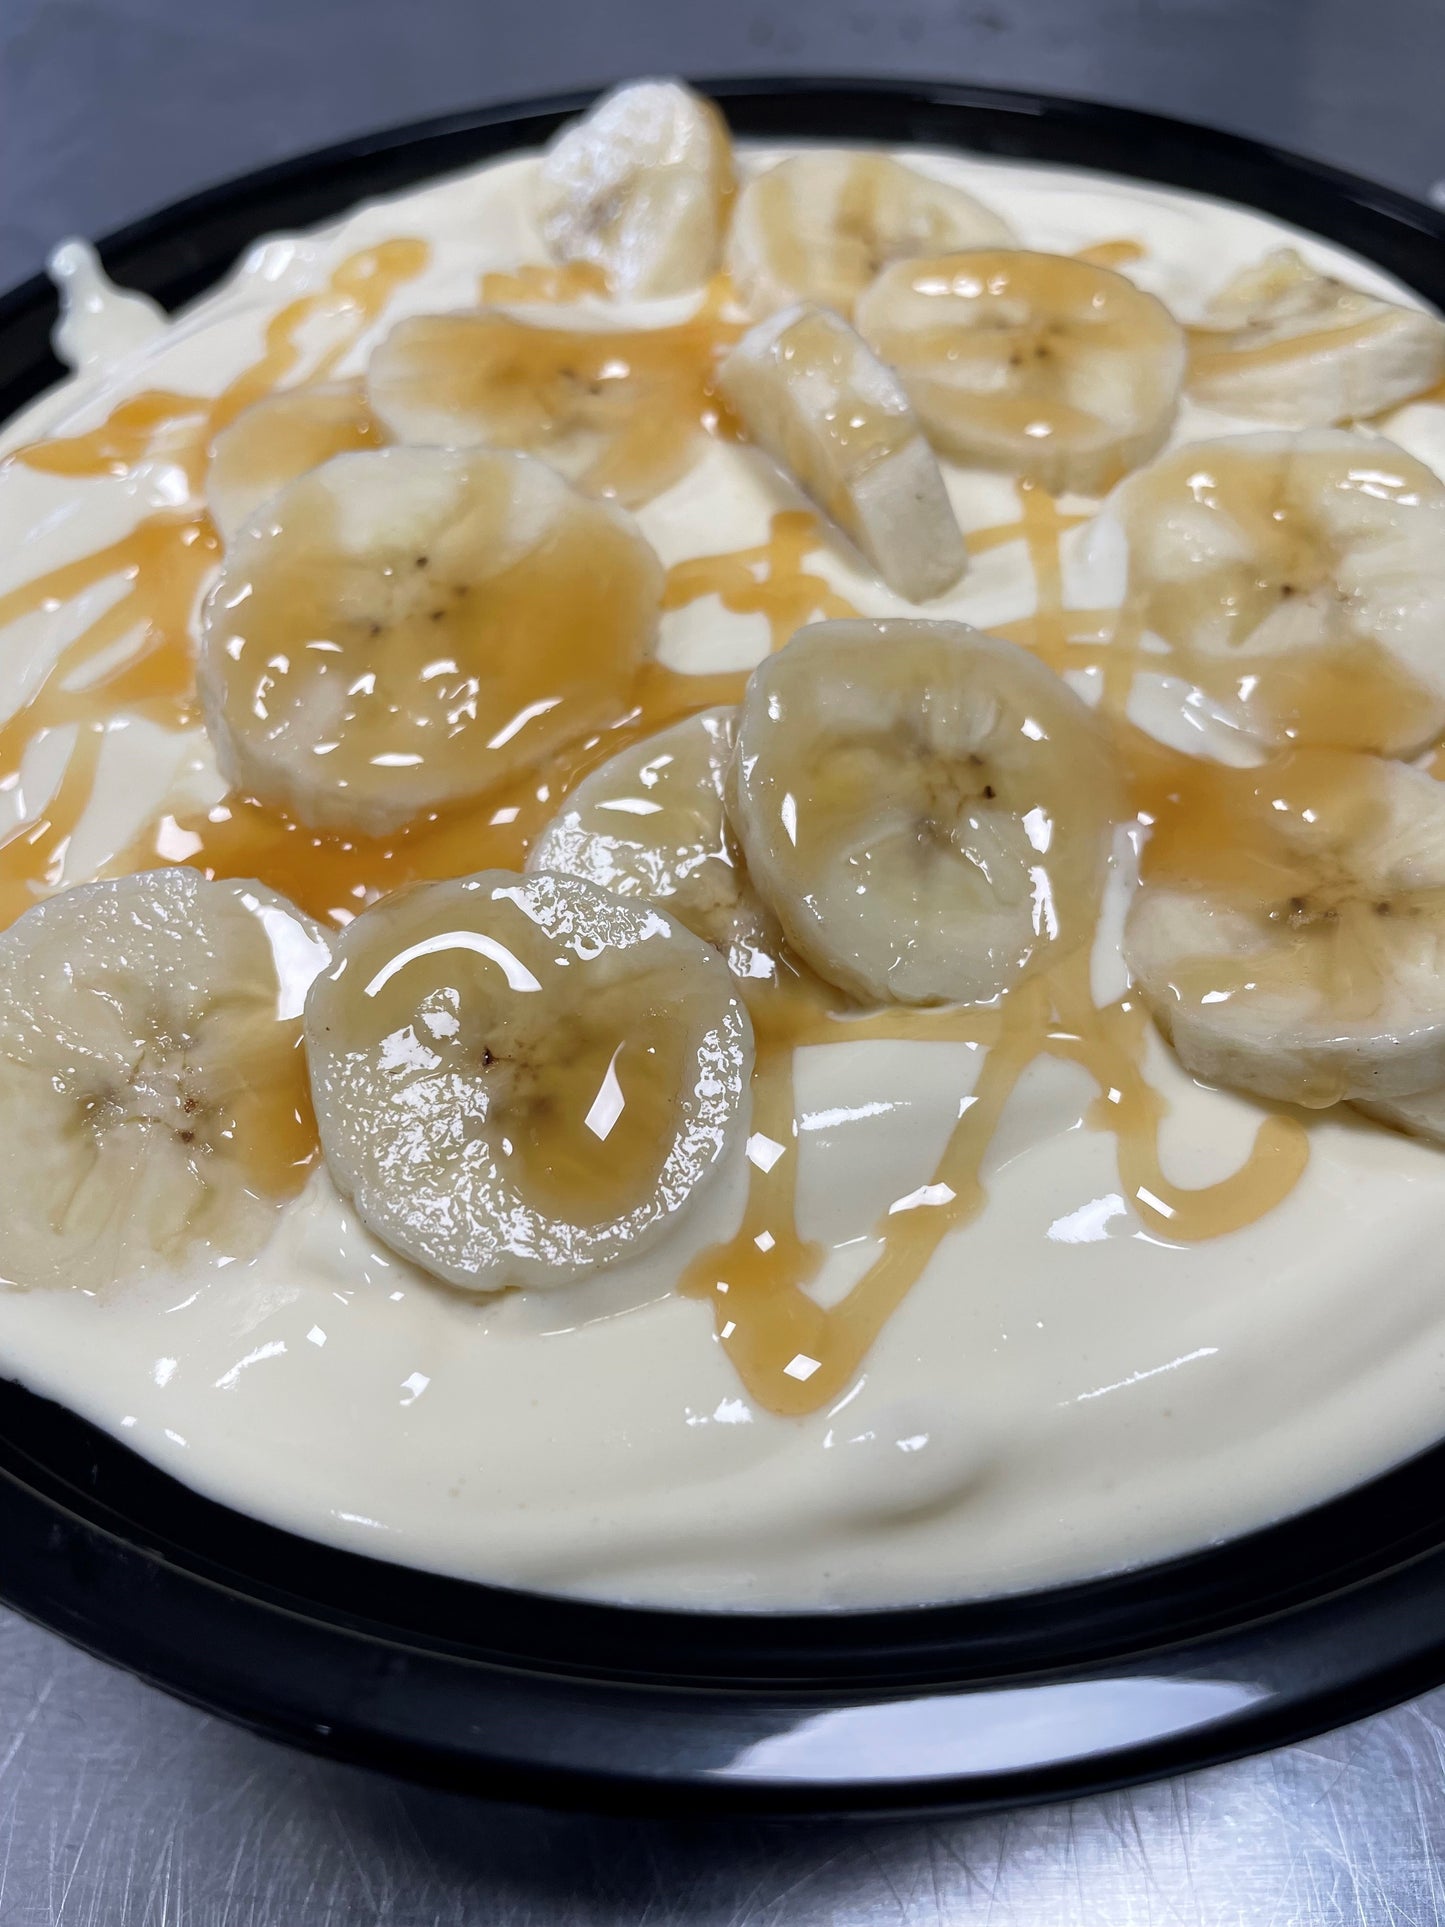 Scratch made banana pudding with fresh banana's and a caramel twist